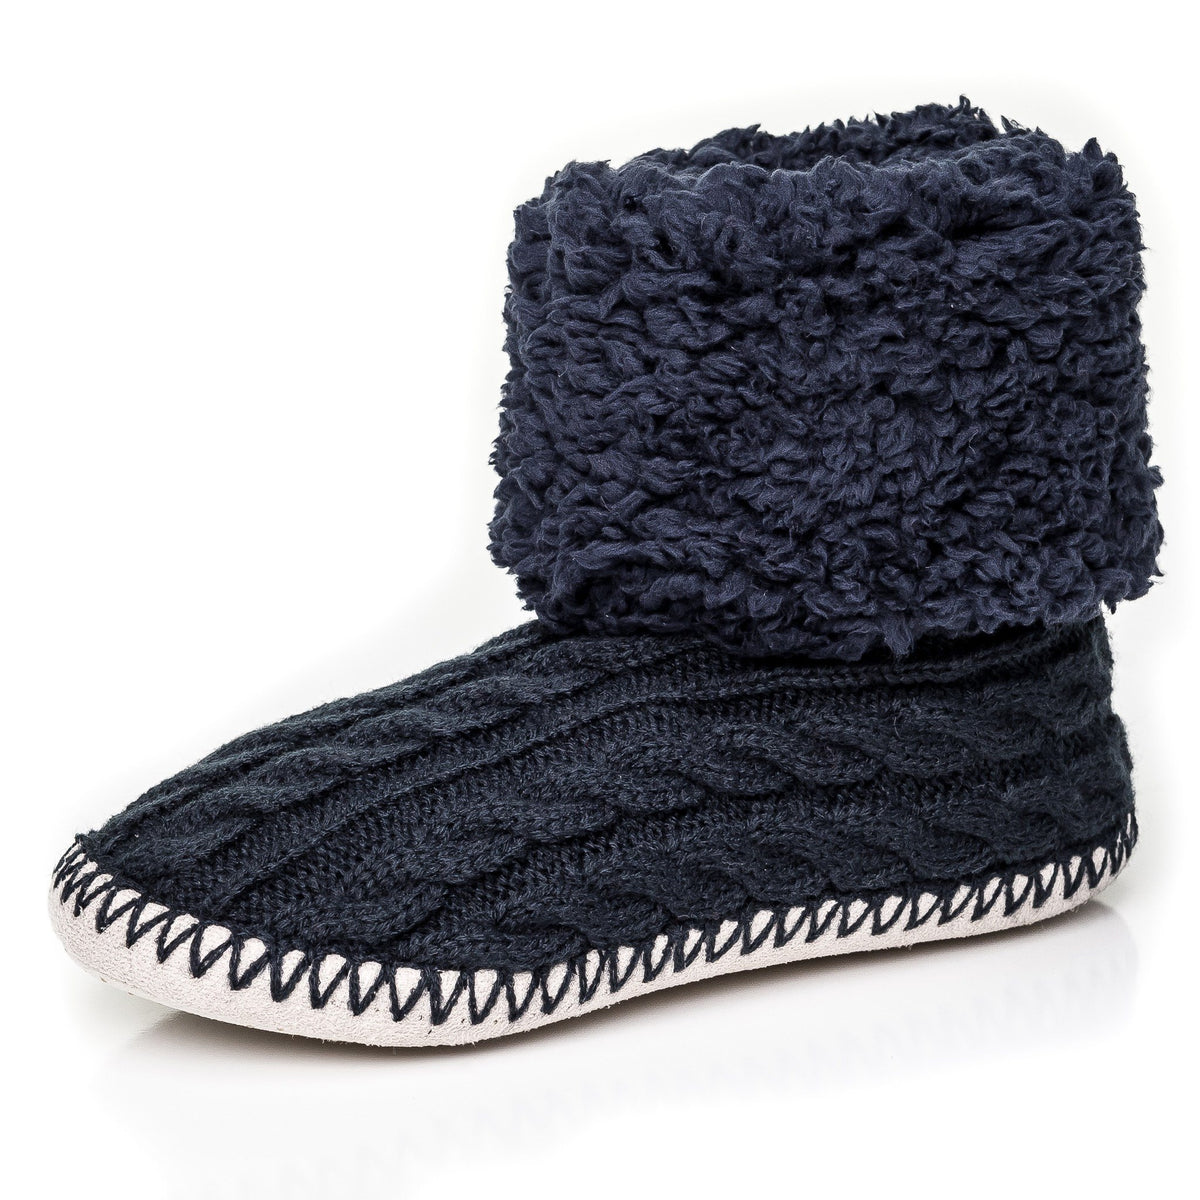 Women's Fuzzy Delight Cable Knit Indoor Short Boot Slippers - Navy